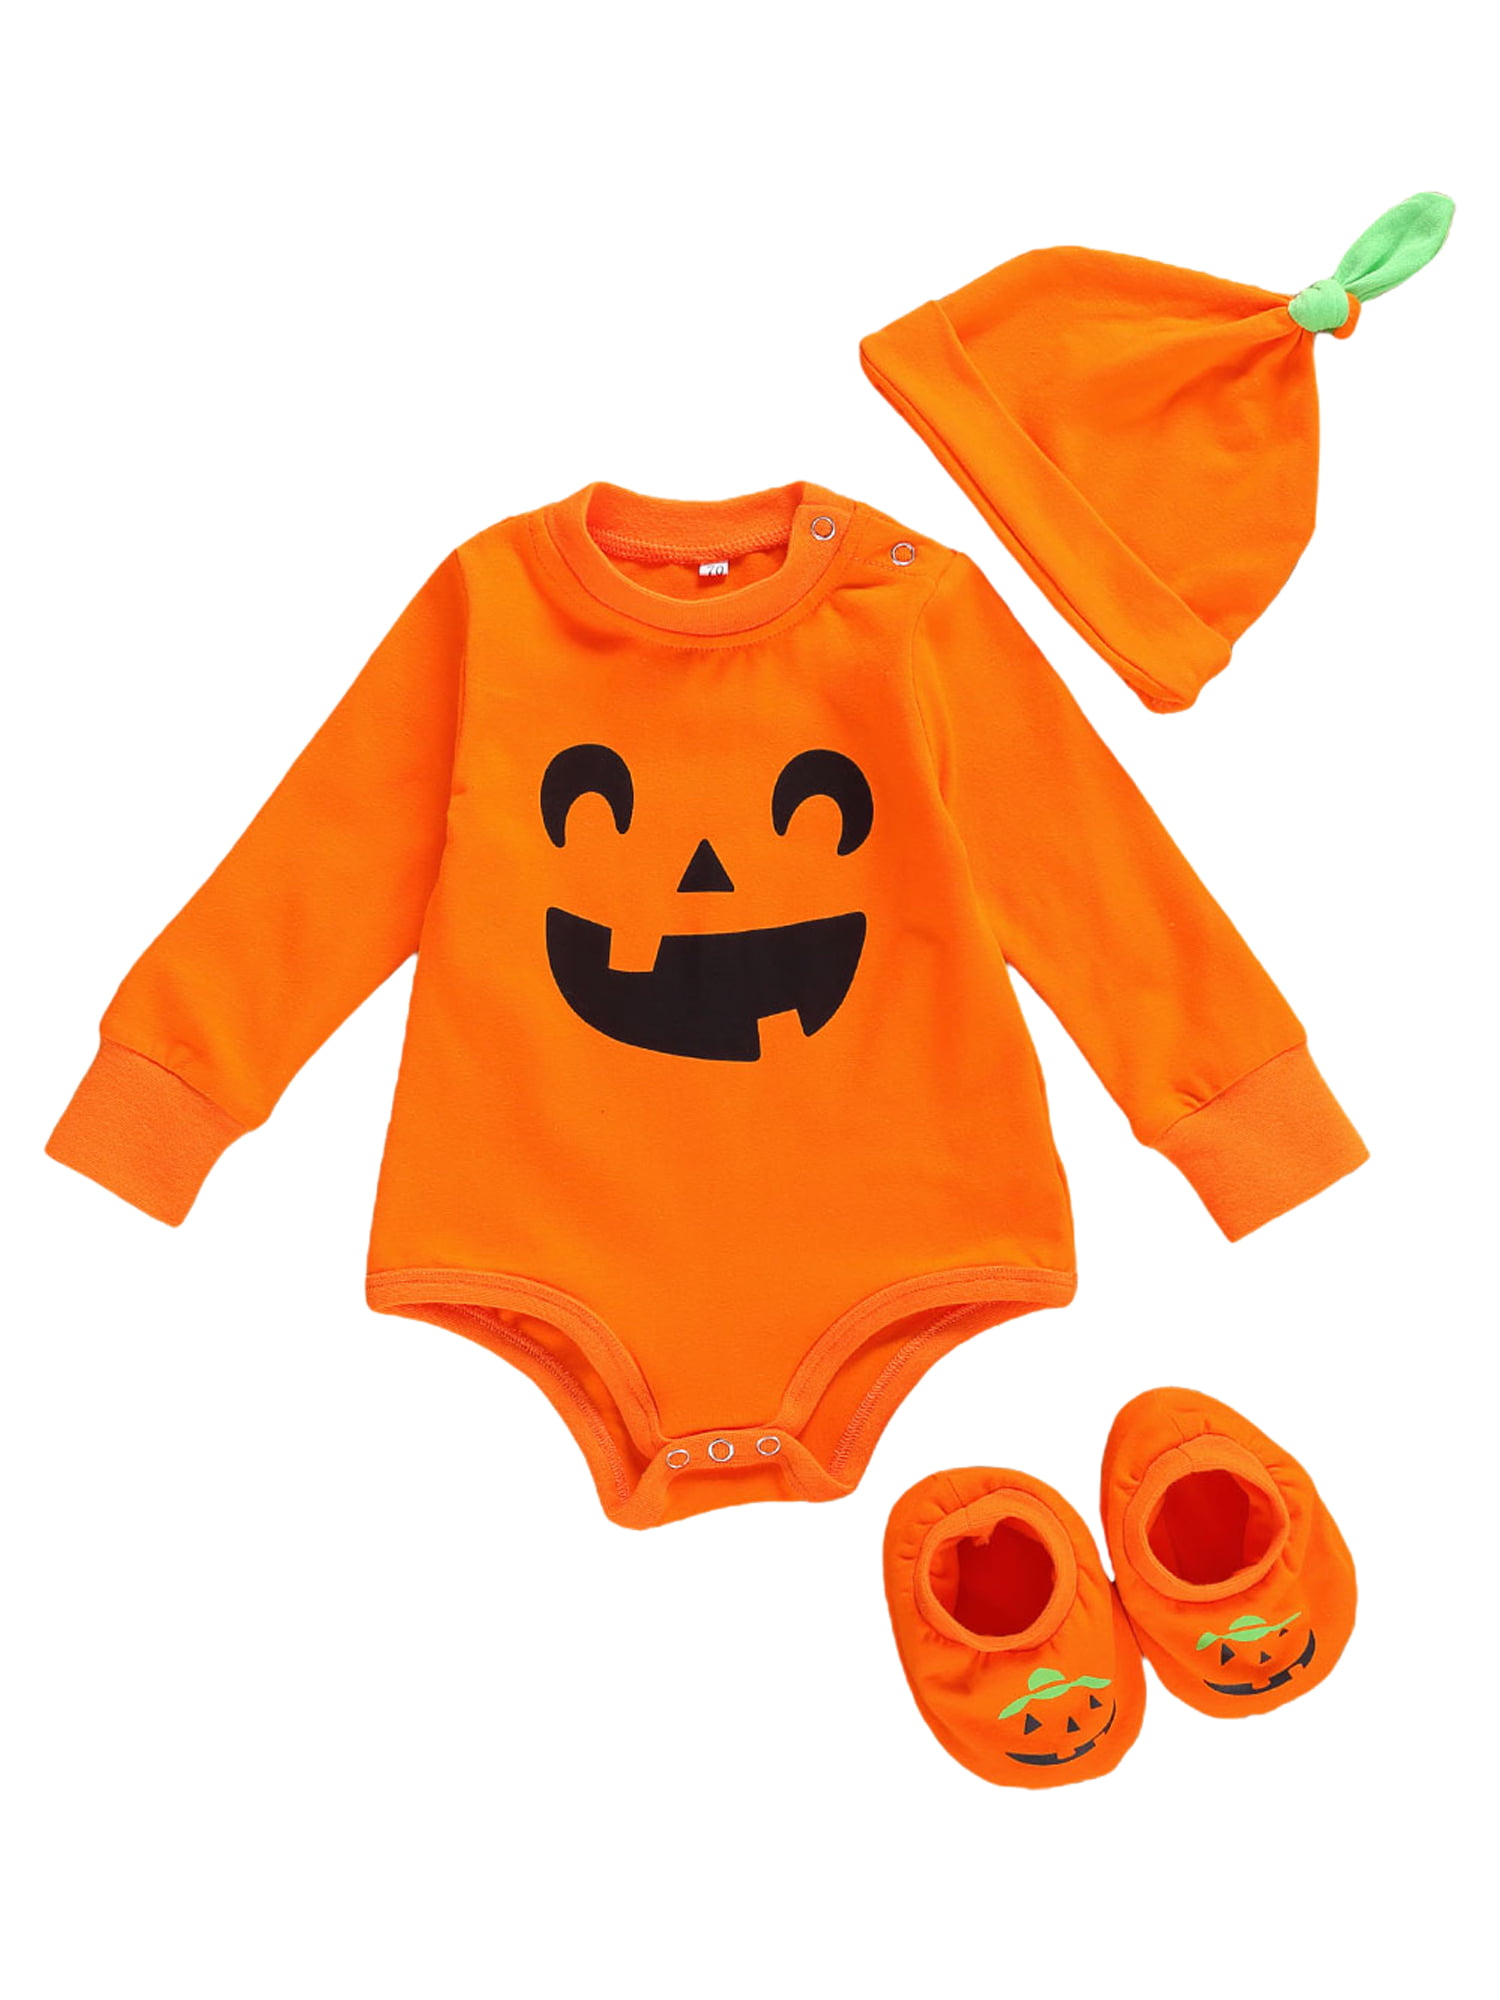 My First Halloween Costumes Outfit,Newborn Toddler Infant Baby Girl Boy Pumpkin Romper Pants Hat,Long Sleeve Clothes Winter Gifts 12-18 Months, Black 